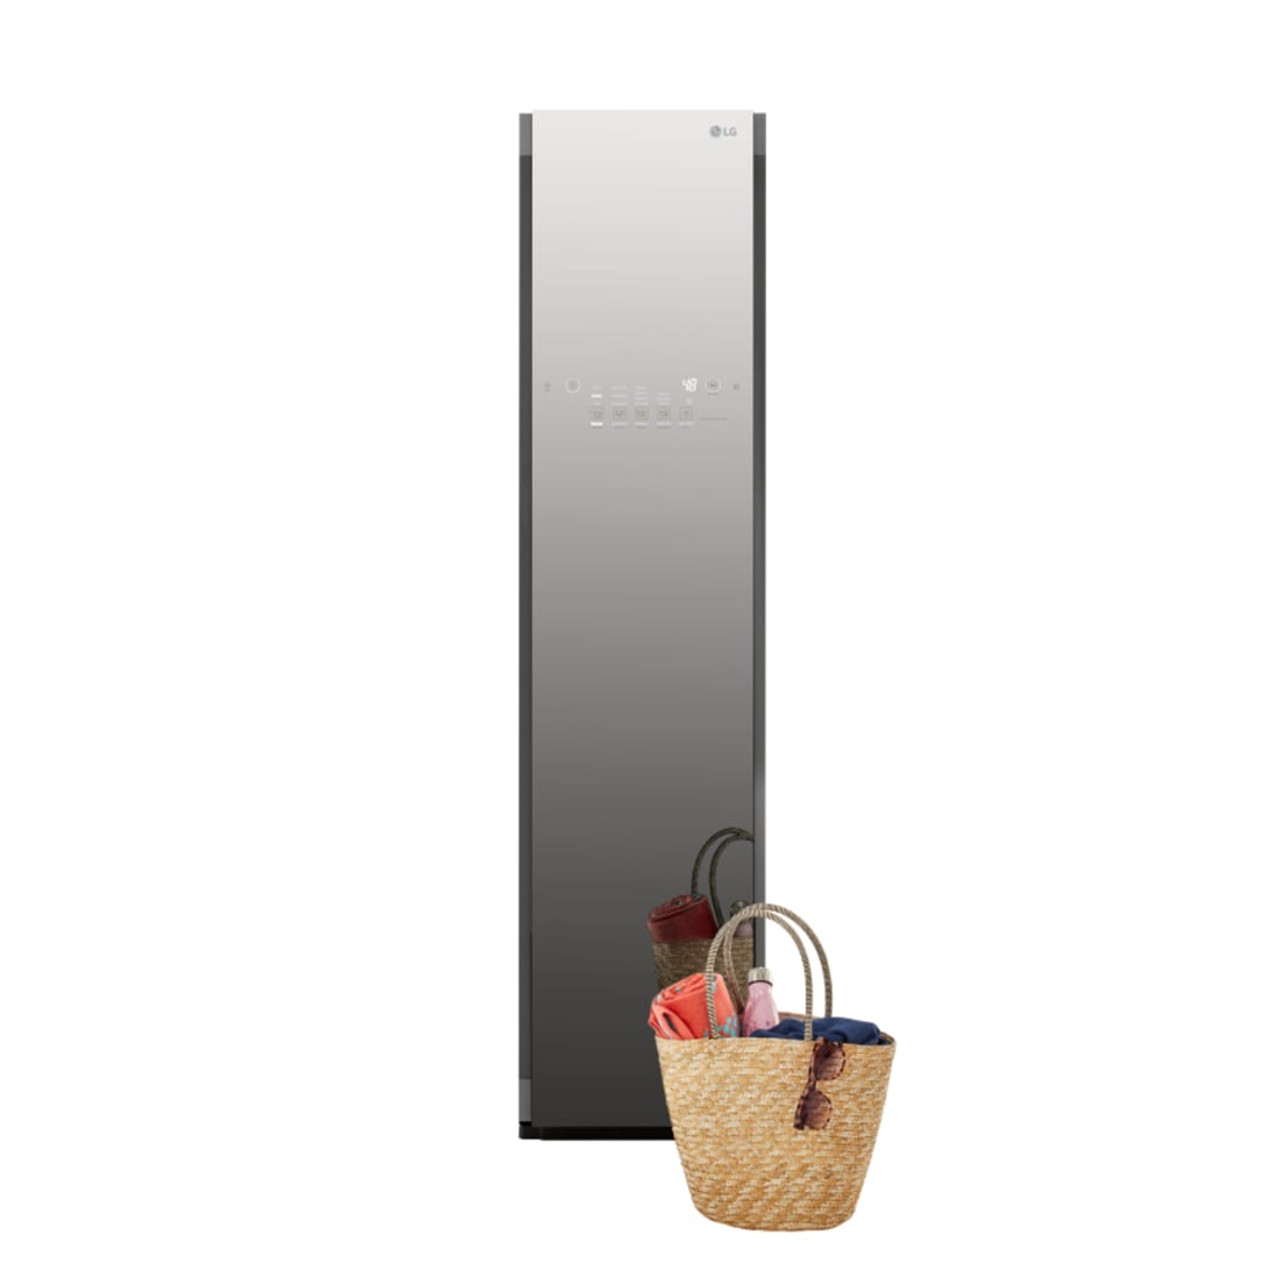 LG Styler Smart Wi-Fi Enabled Steam Closet with TrueSteam Technology and Exclusive Moving Hangers - S3MFBN